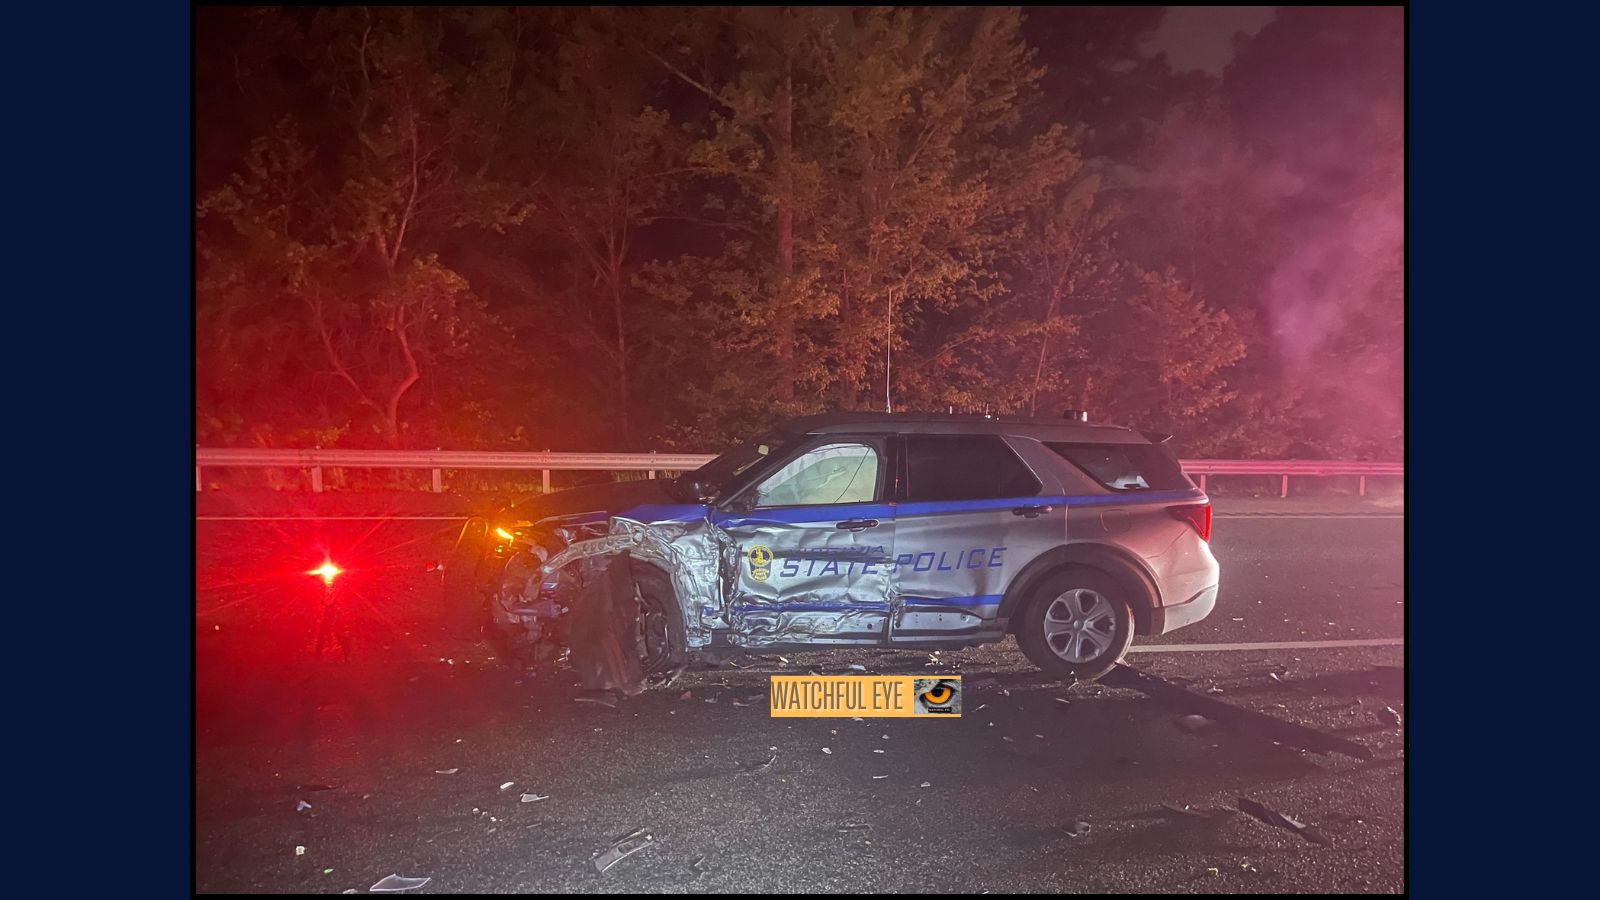 Virginia State Trooper caused a crash to stop wrong-way driver